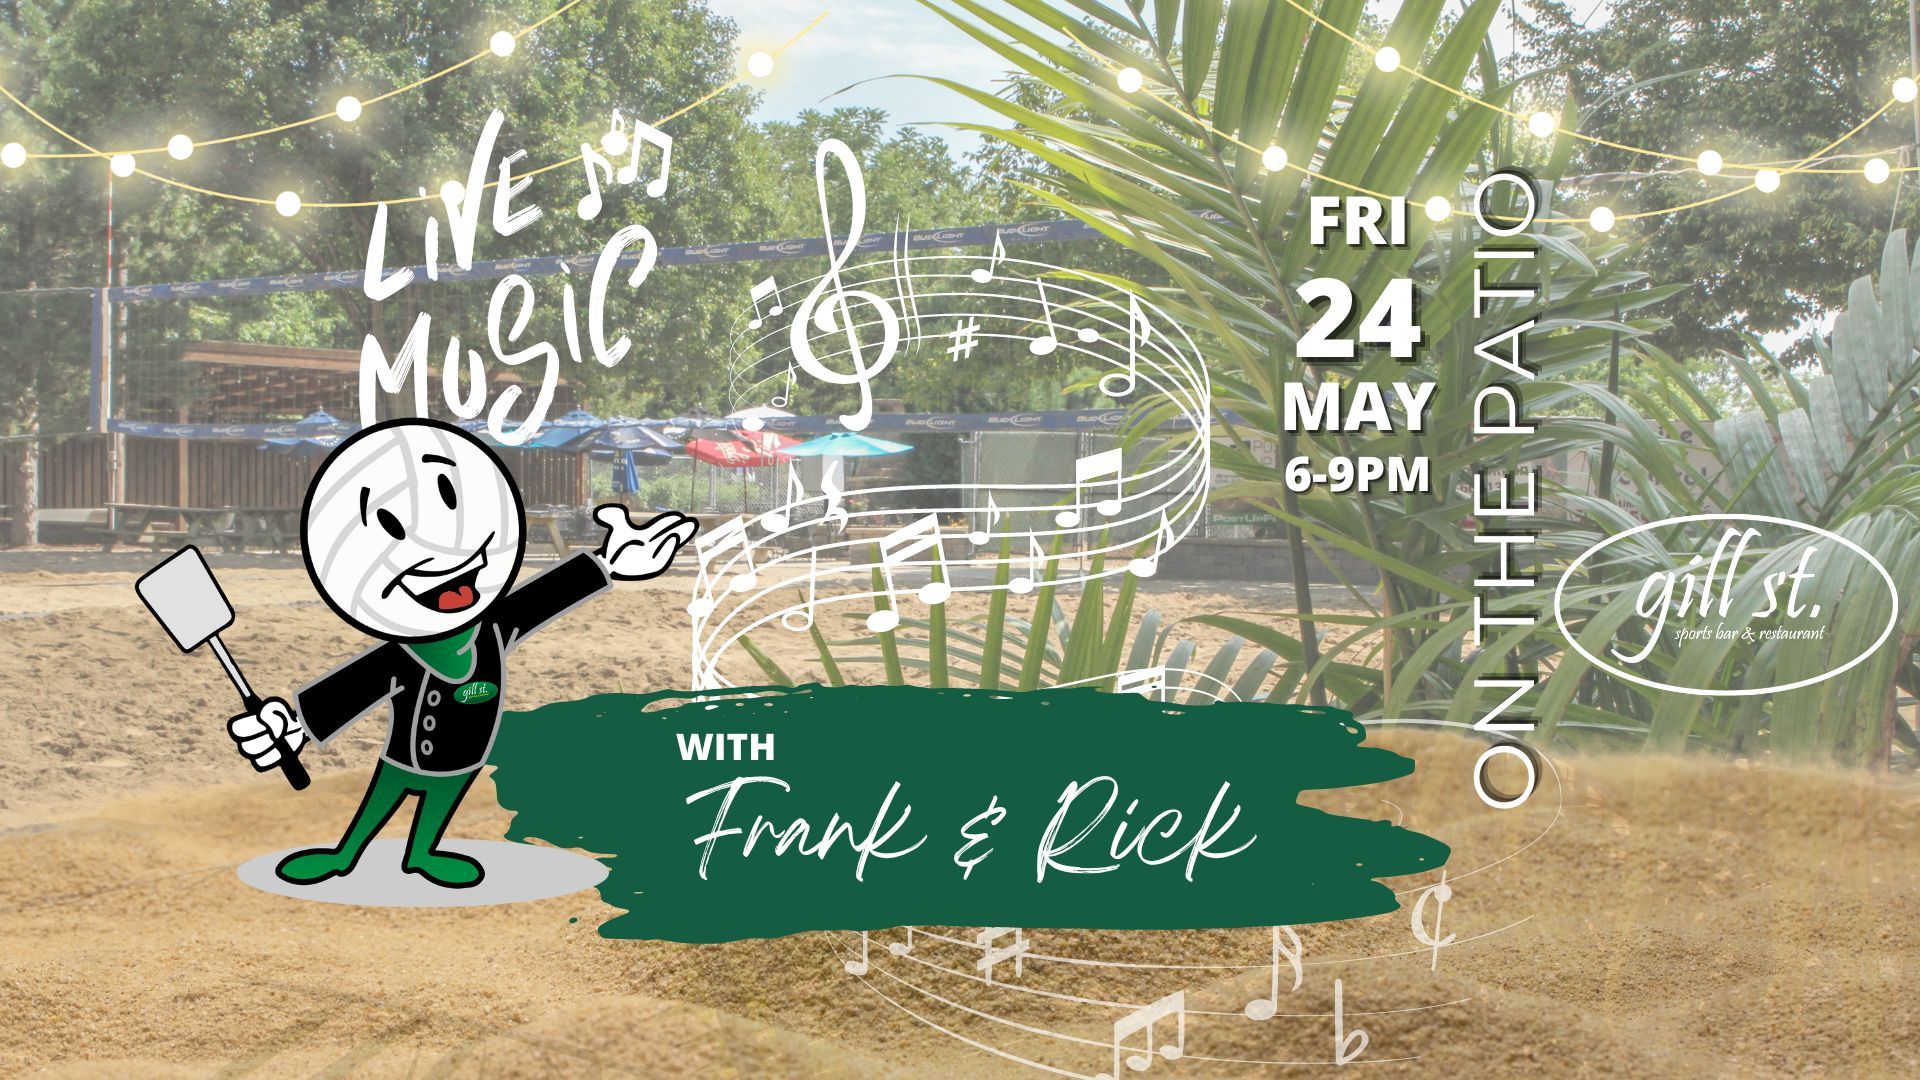 Live Music with Frank & Rick